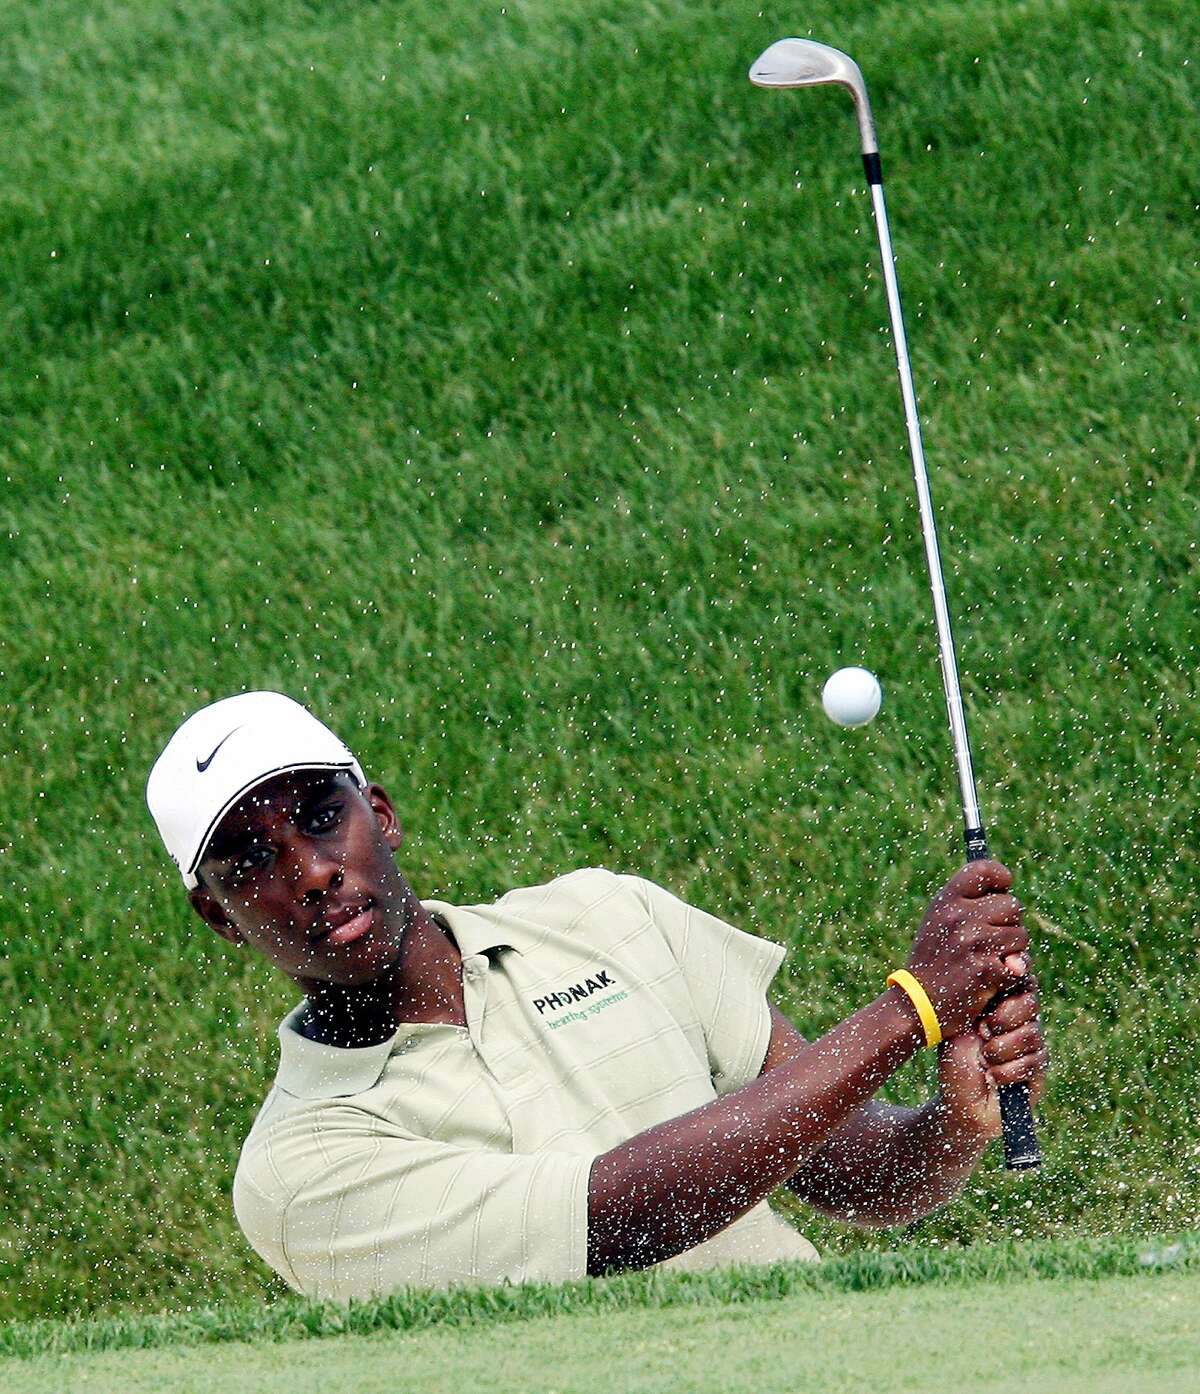 Former Ohio State golfer Kevin Hall hits out of the bunker on the 18th hole during a practice round at the 2006 Memorial golf tournament at the Muirfield Village Golf Club, Tuesday, May 30, 2006, in Dublin, Ohio (AP Photo/Terry Gilliam)